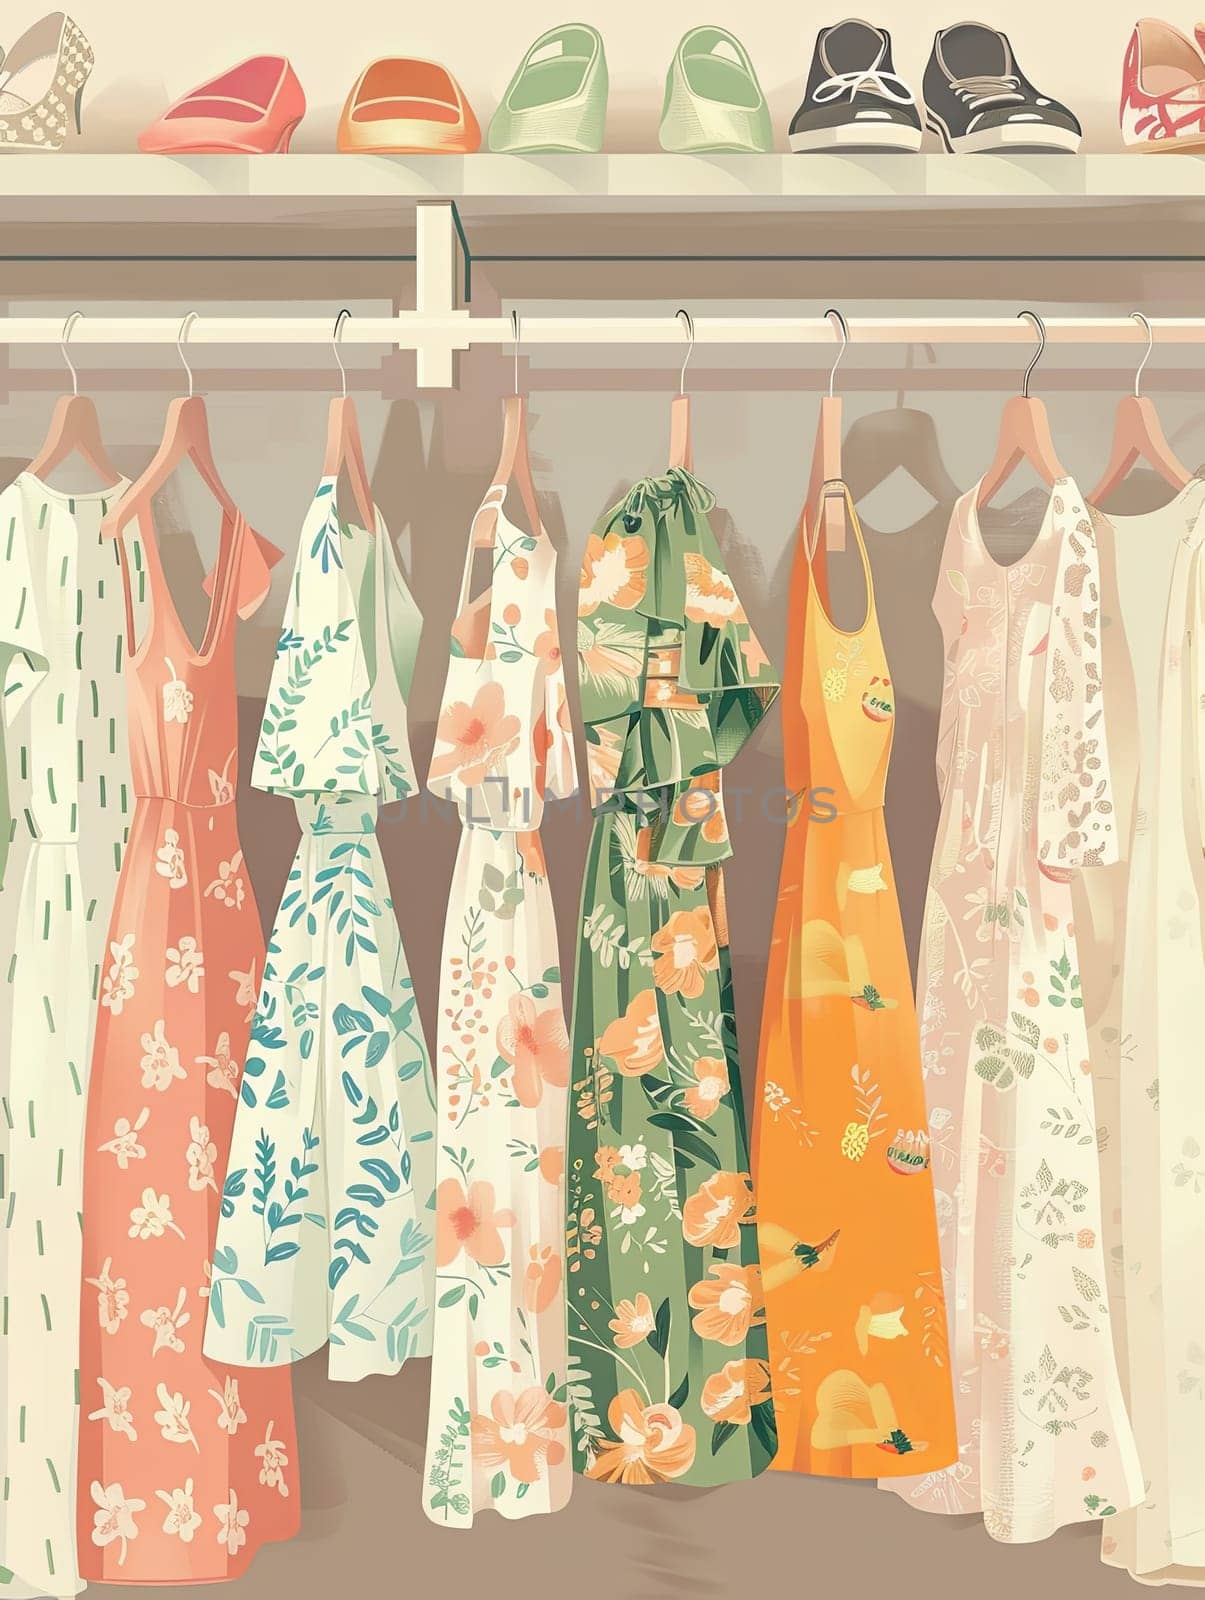 A collection of fashionable womens dresses and shirts hanging neatly on a rack in a summer closet.